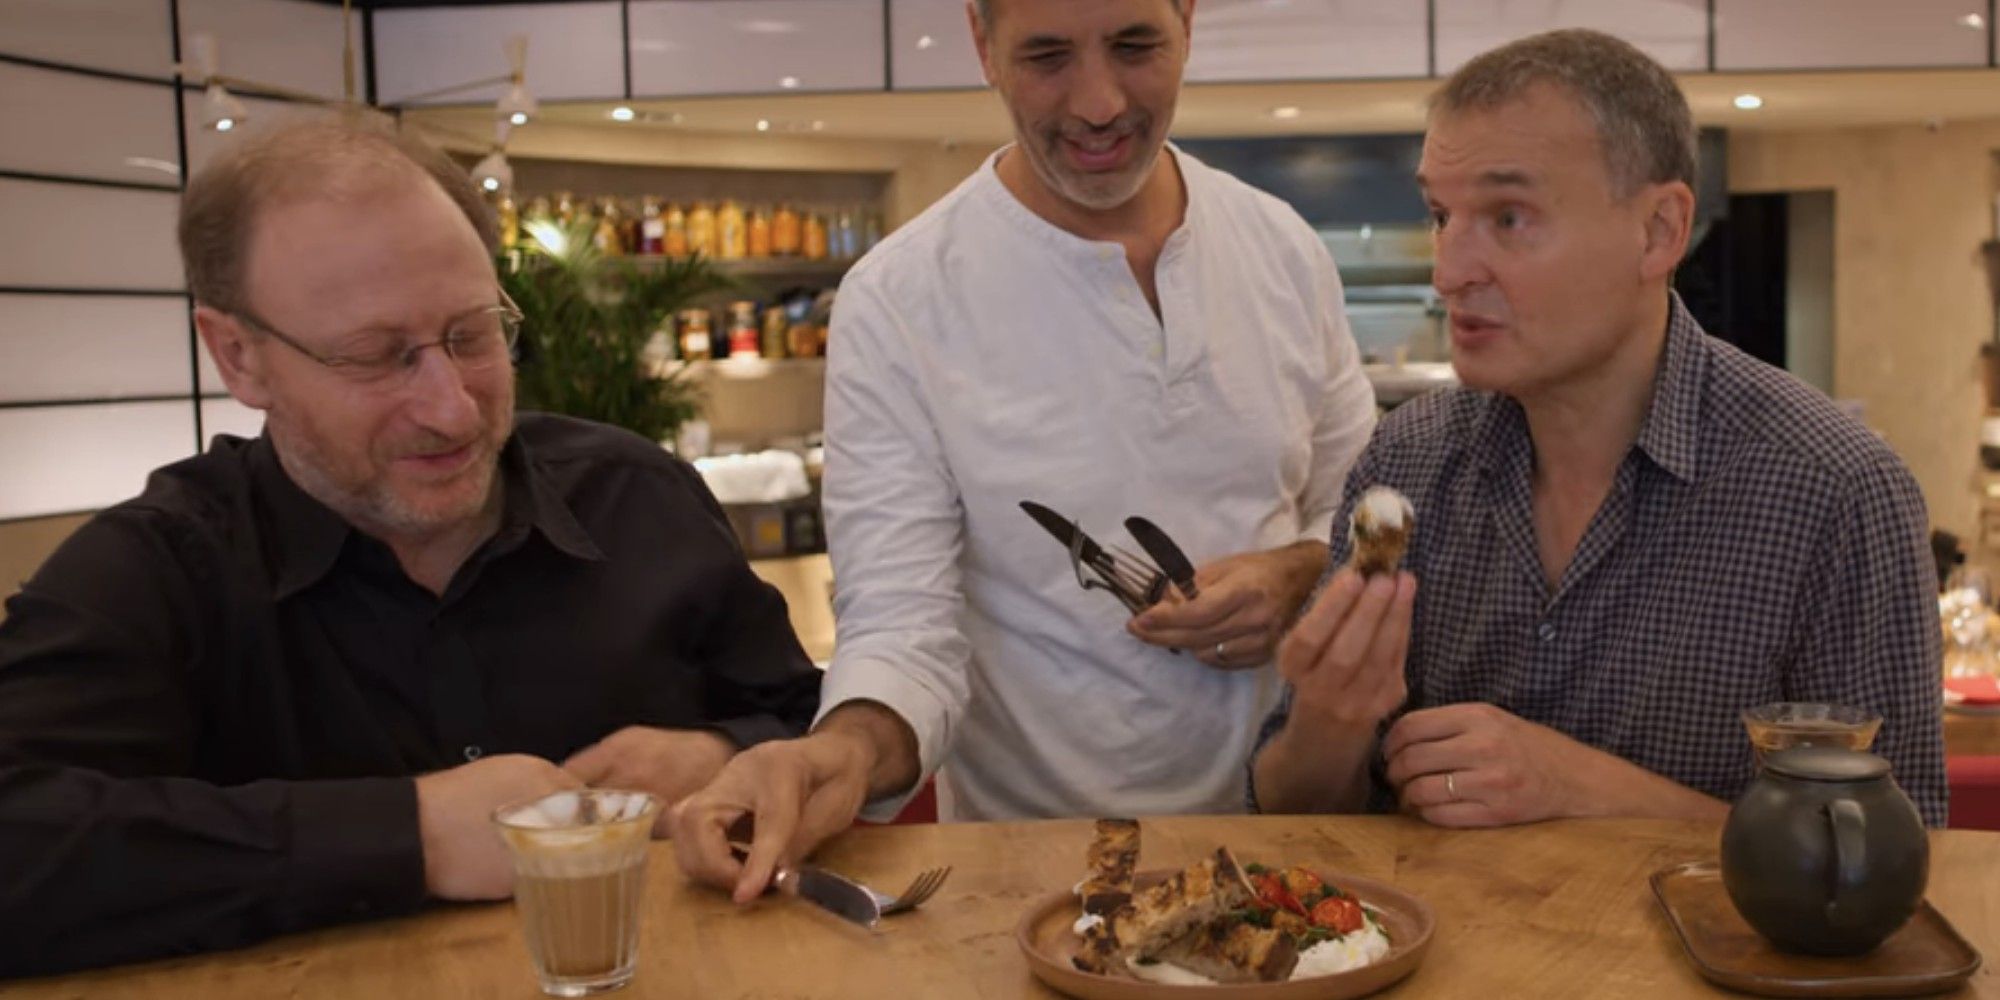 Phil Rosenthal and Yotam Ottolenghi eating at a table in Rovi in Somebody Feed Phil season 3 episode 3